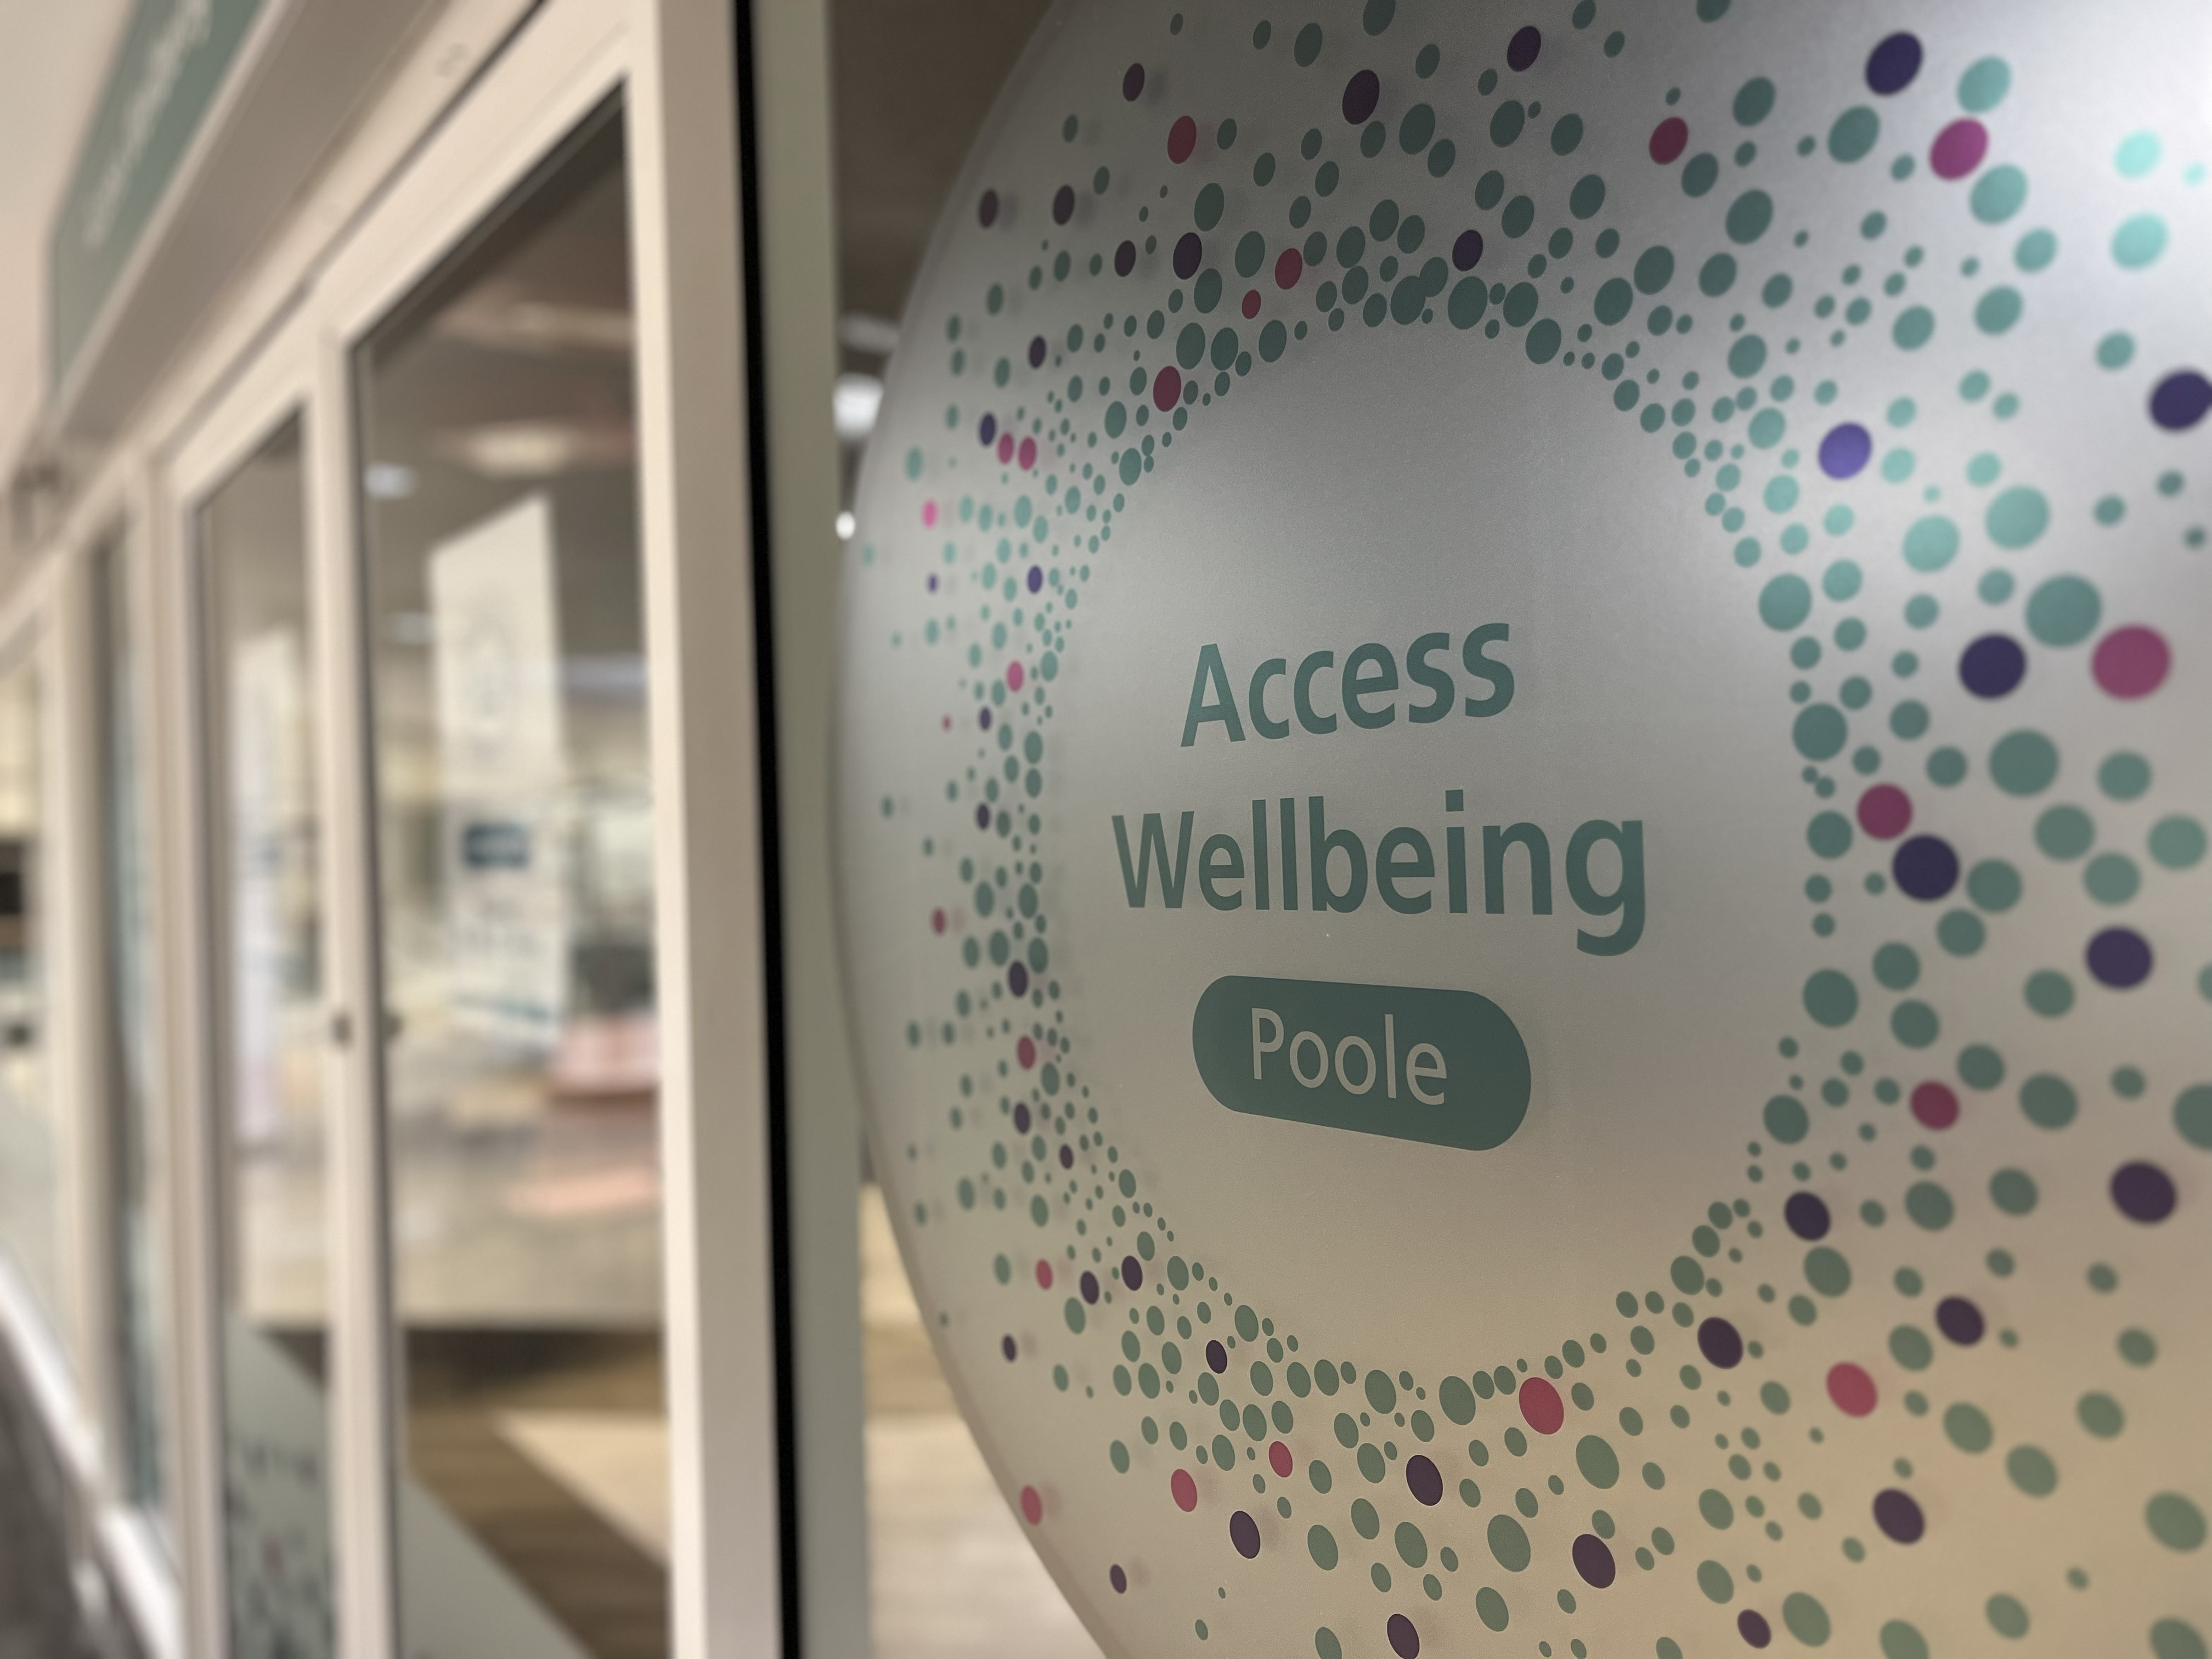 Access Wellbeing Poole opens its doors